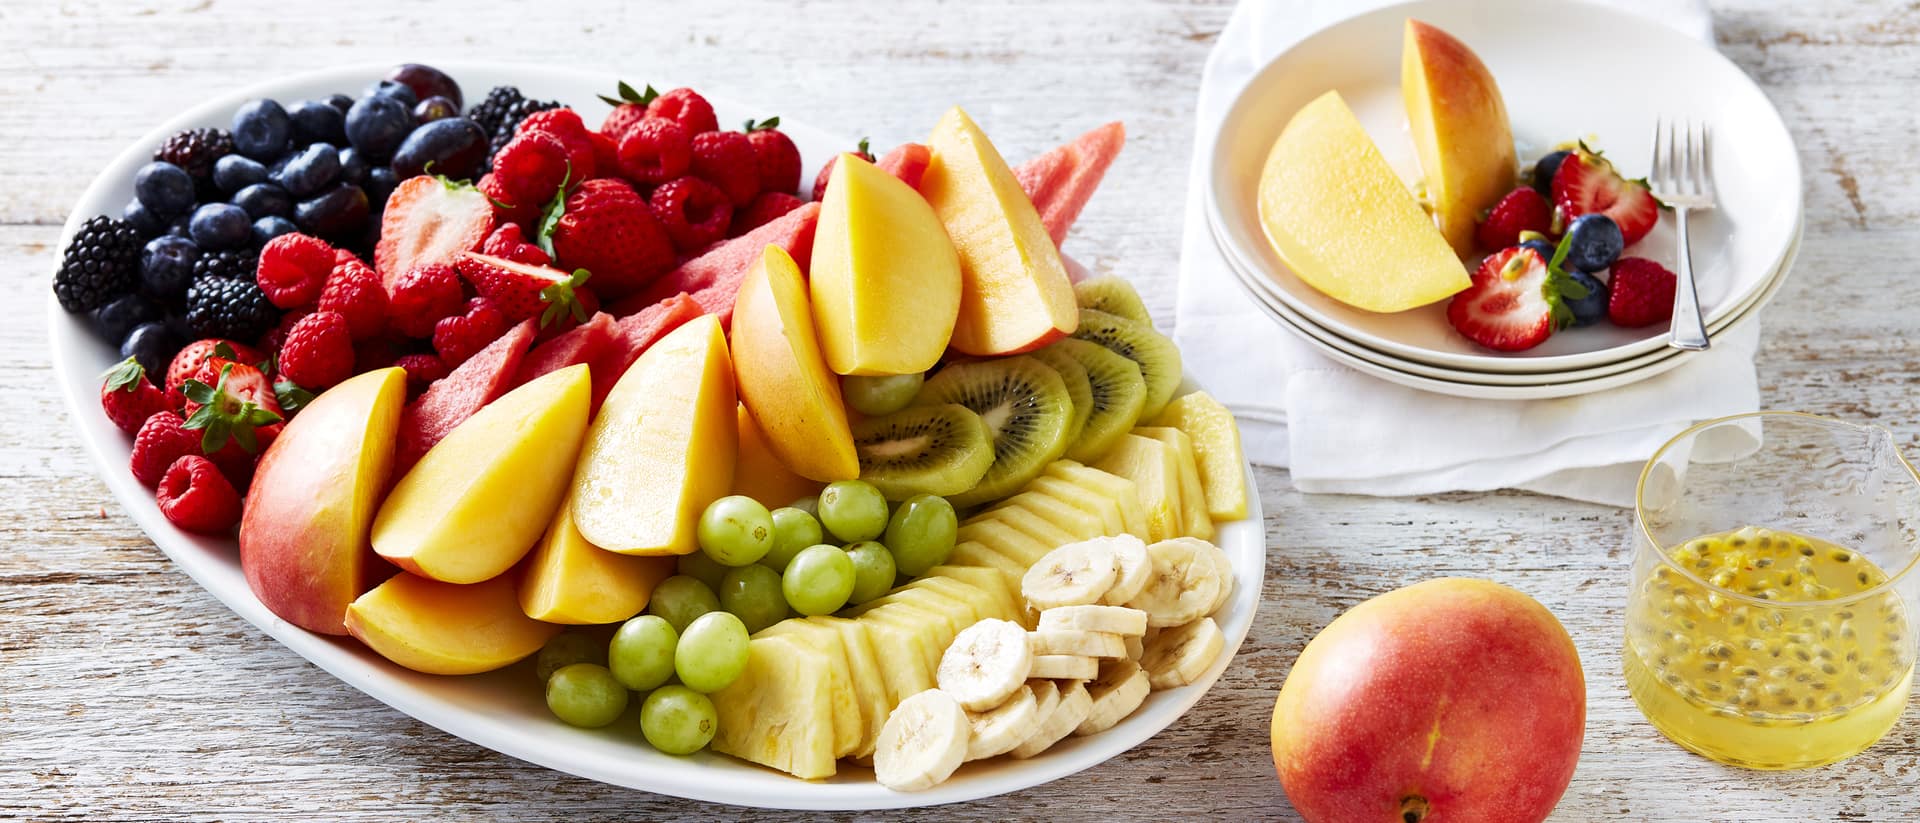 Rainbow Fruit Platter with Passionfruit Syrup Recipe